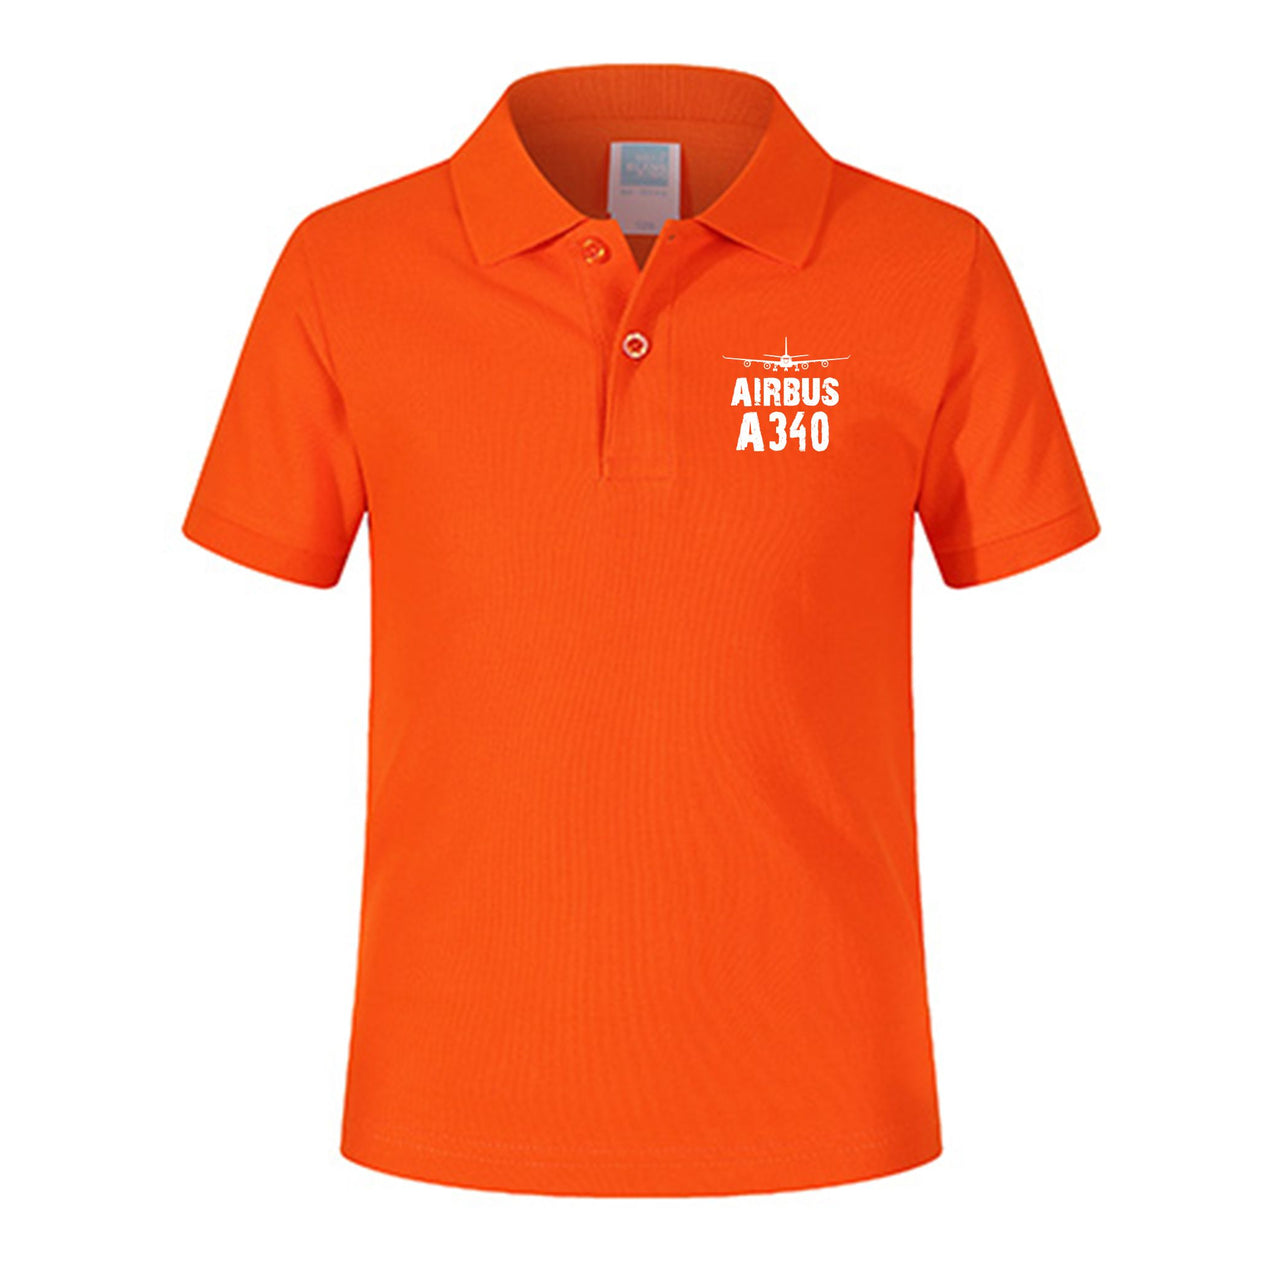 Airbus A340 & Plane Designed Children Polo T-Shirts